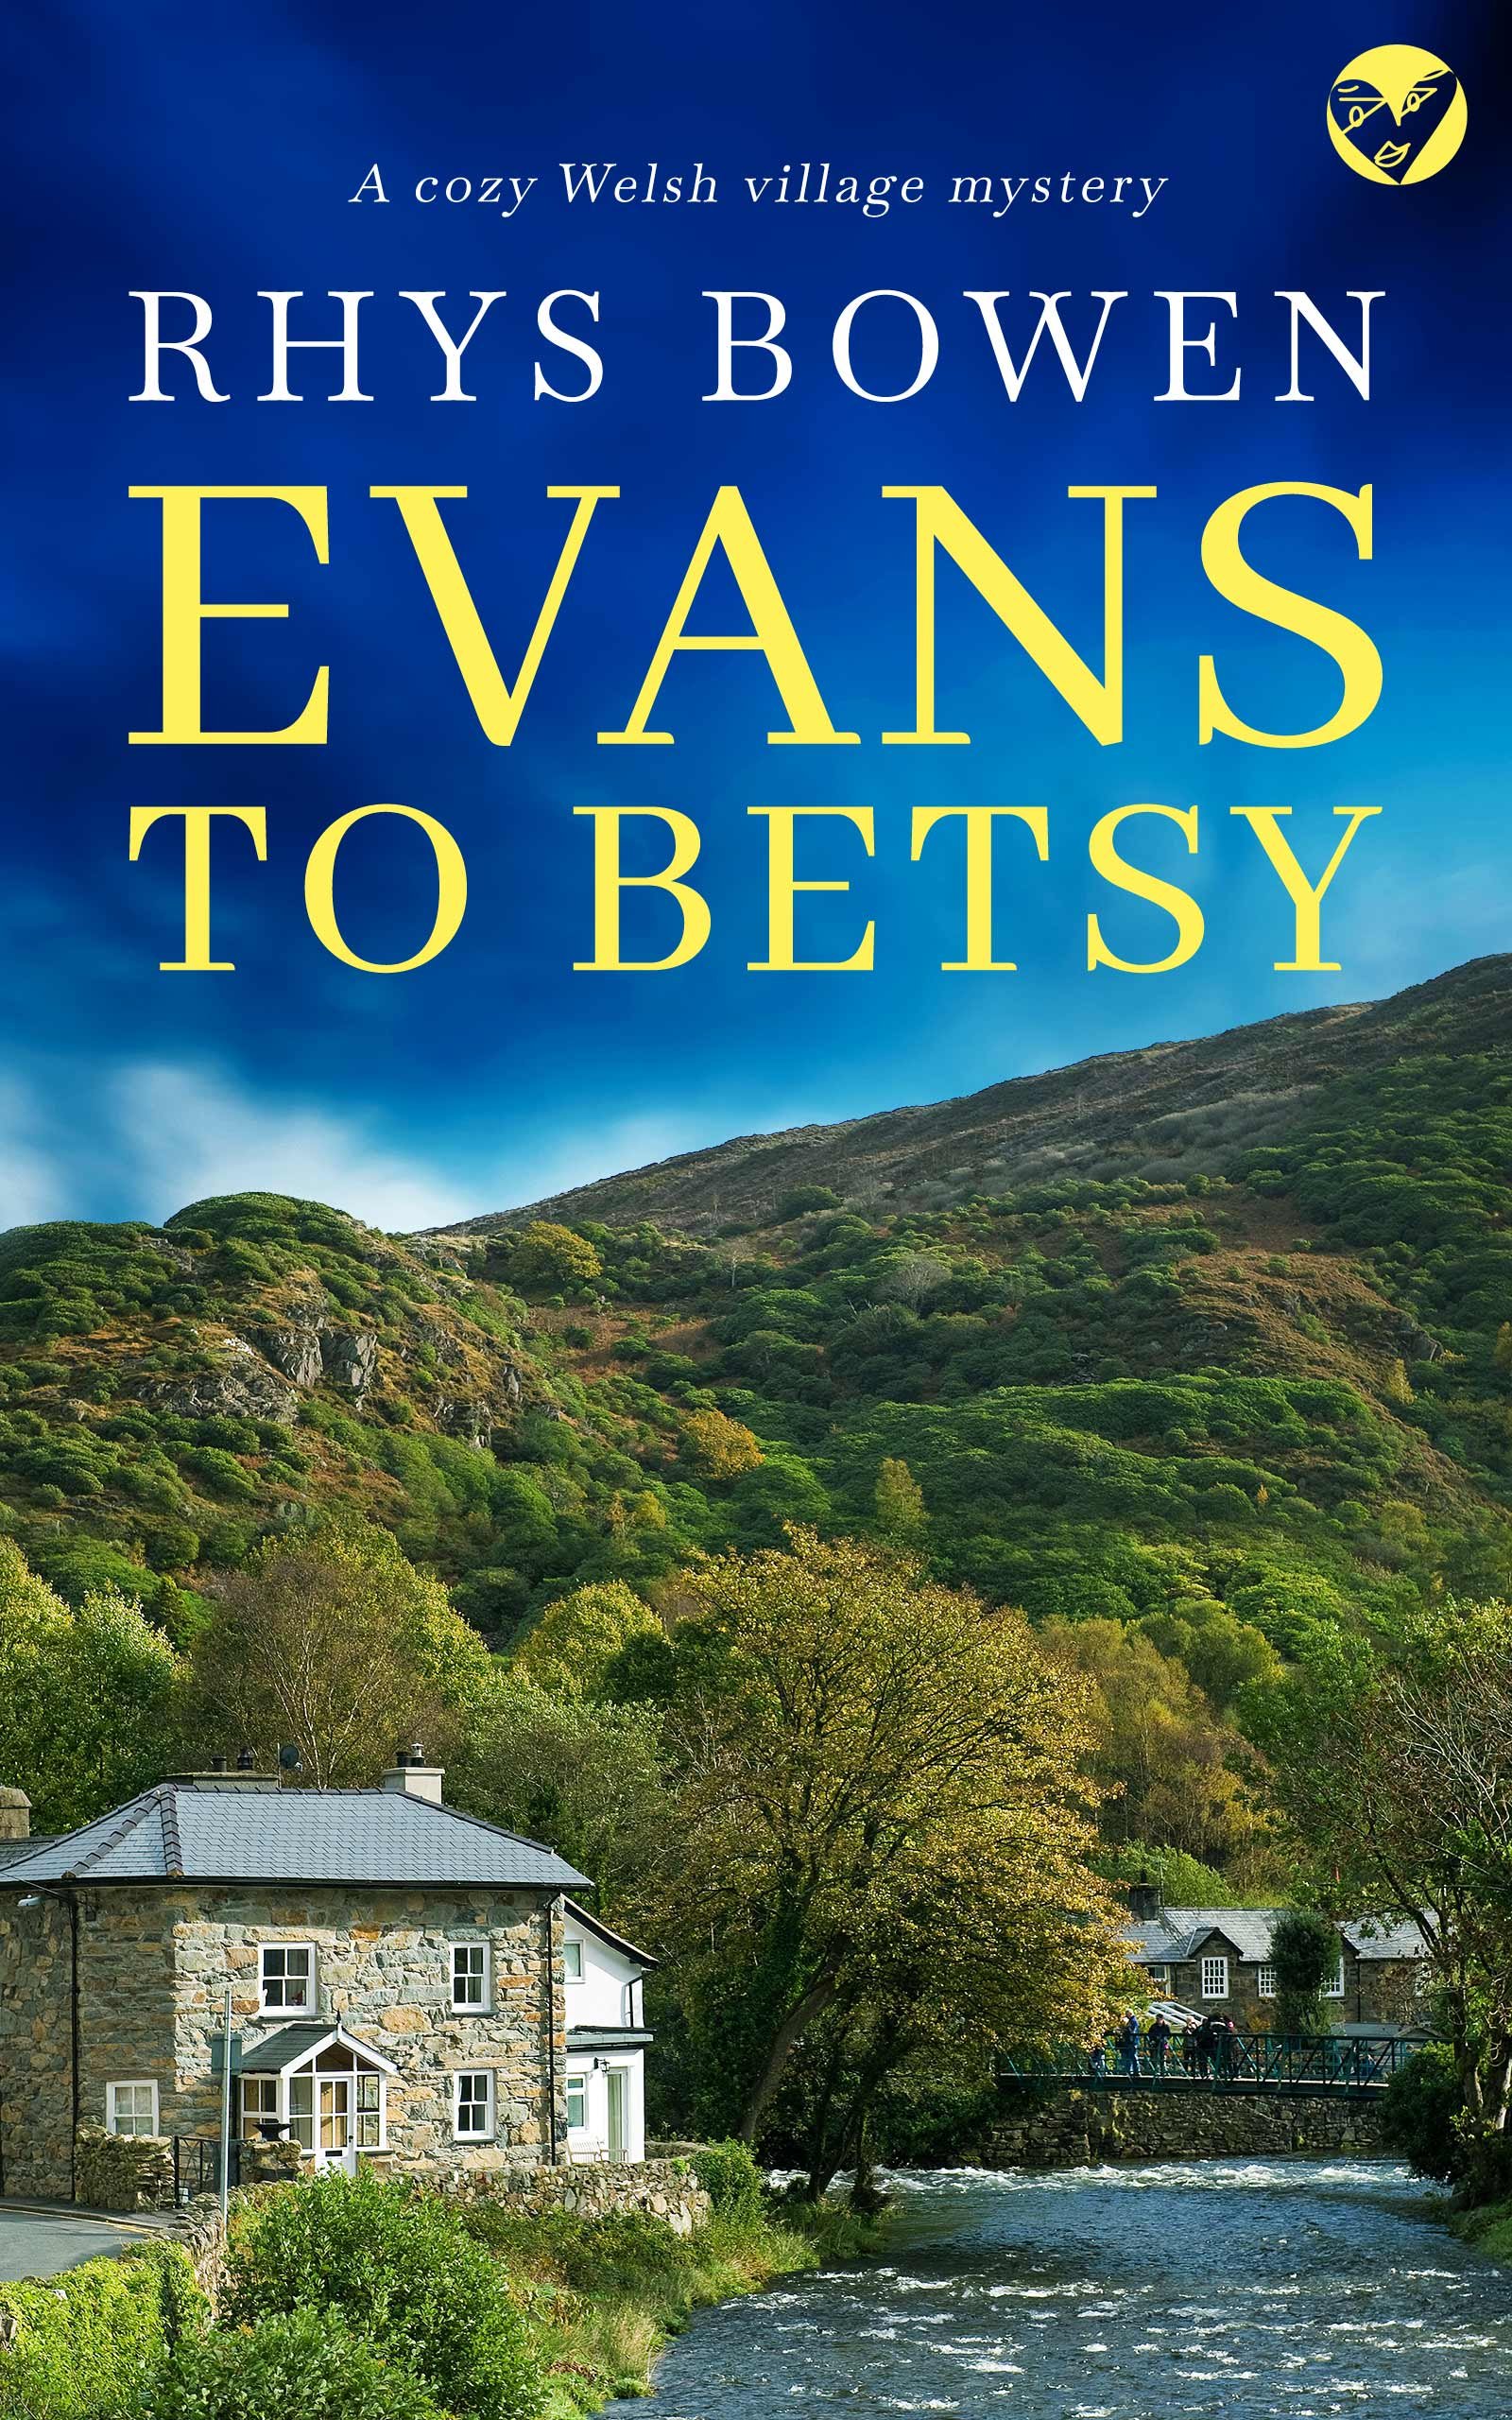 EVANS TO BETSY Cover publish 645KB.jpg